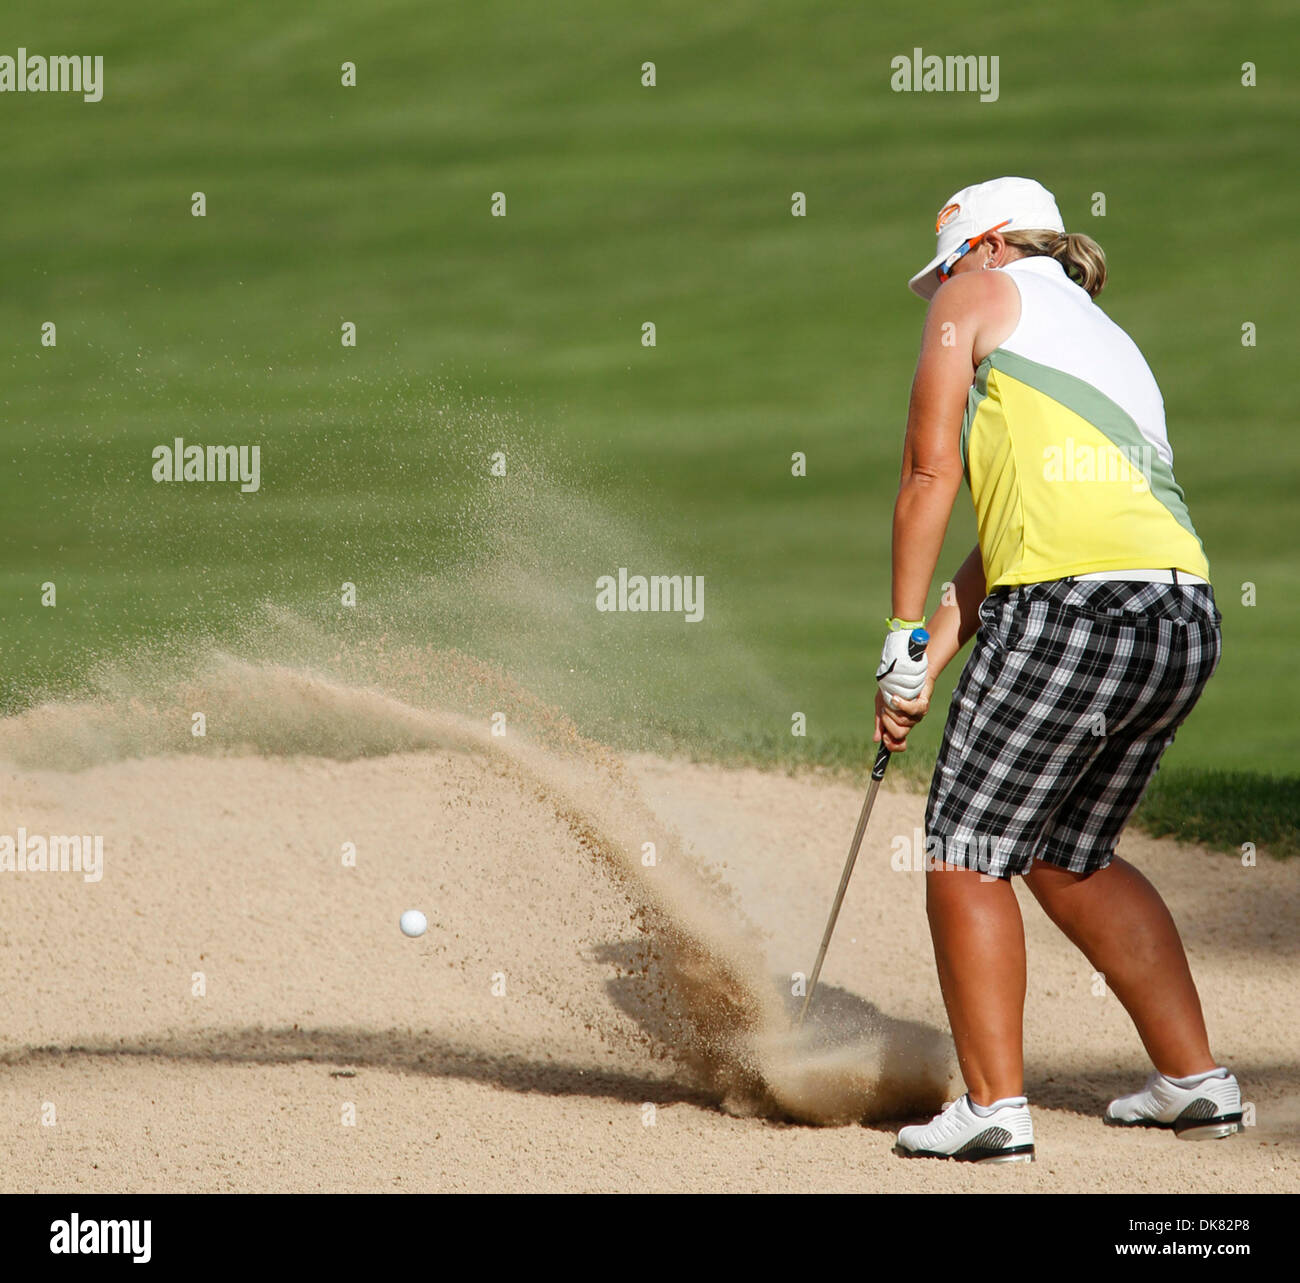 Jul 8, 2011 - Colorado Springs, Colorado, U.S. - KAREN STUPPLES uses a sand wedge to unsuccessfully get out of the trap on 15 during second round play, Friday in Colorado Springs, Colorado at the Broadmoor Country Club. Play was halted due to lightning. (Credit Image: © Will Powers/ZUMAPress.com) Stock Photo